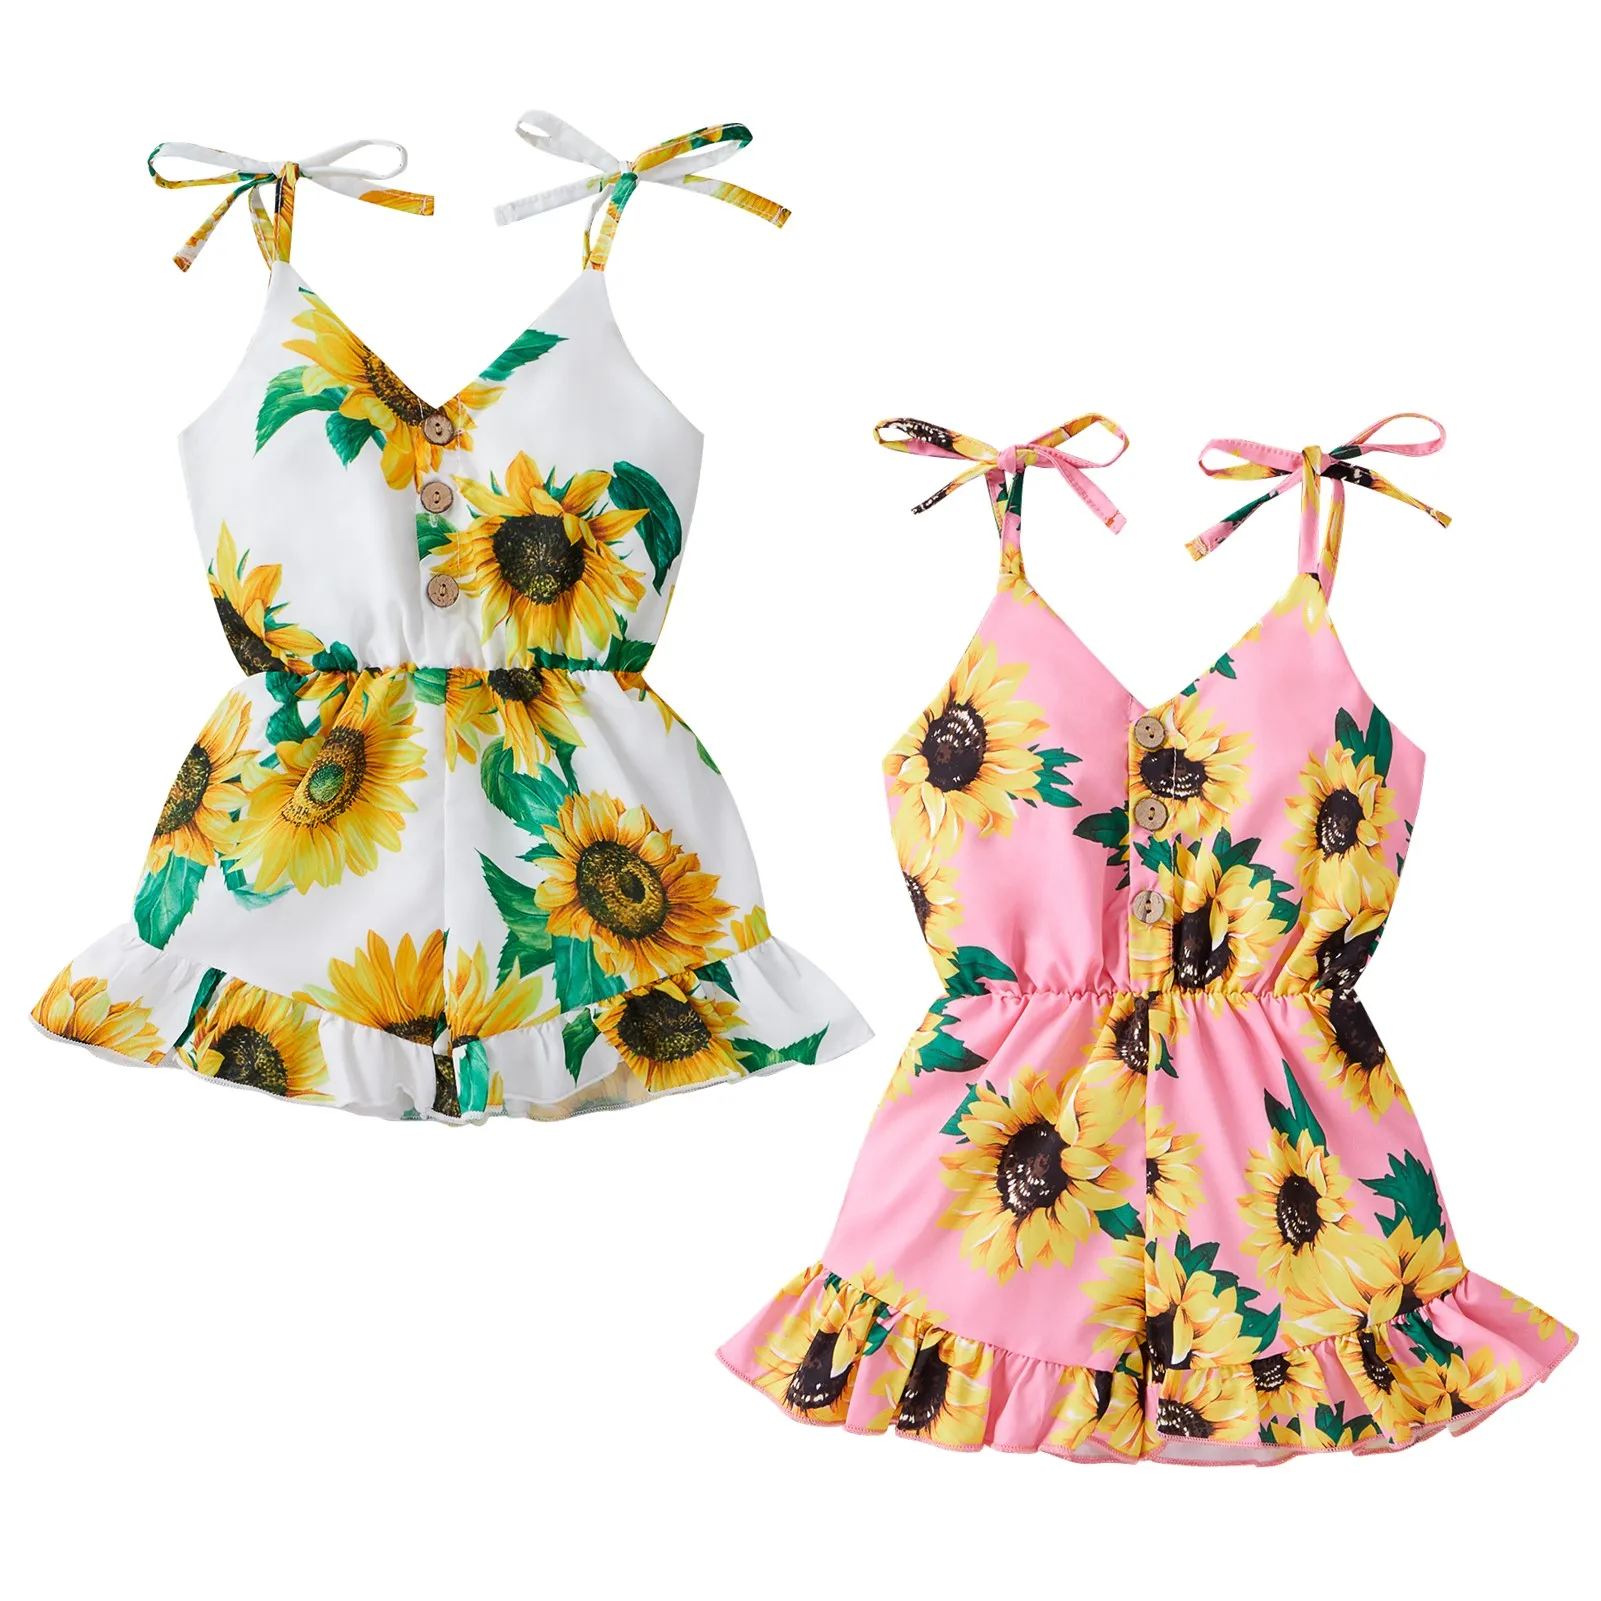 Baby Bodysuits expensive Sunflower Print Romper Baby Girl Clothes Kids Fashion Sleeveless Romper Jumpsuit Spaghetti Strap Rompers for Children Girls Baby Bodysuits made from viscose 